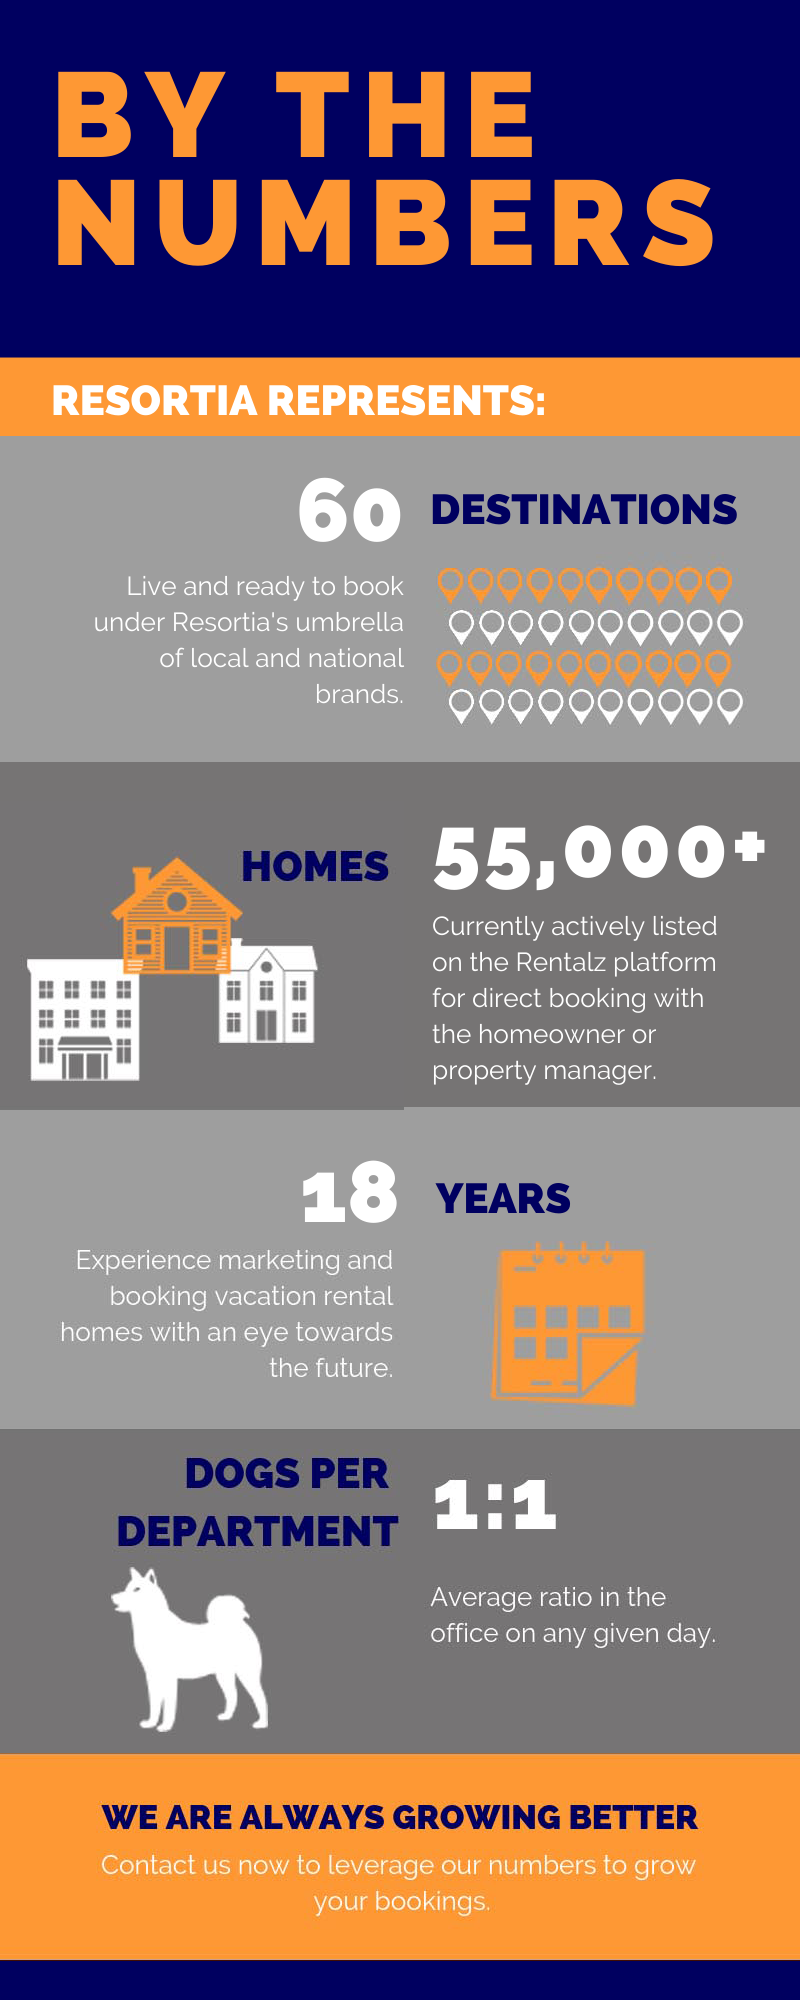 By The Numbers-resortia-2021